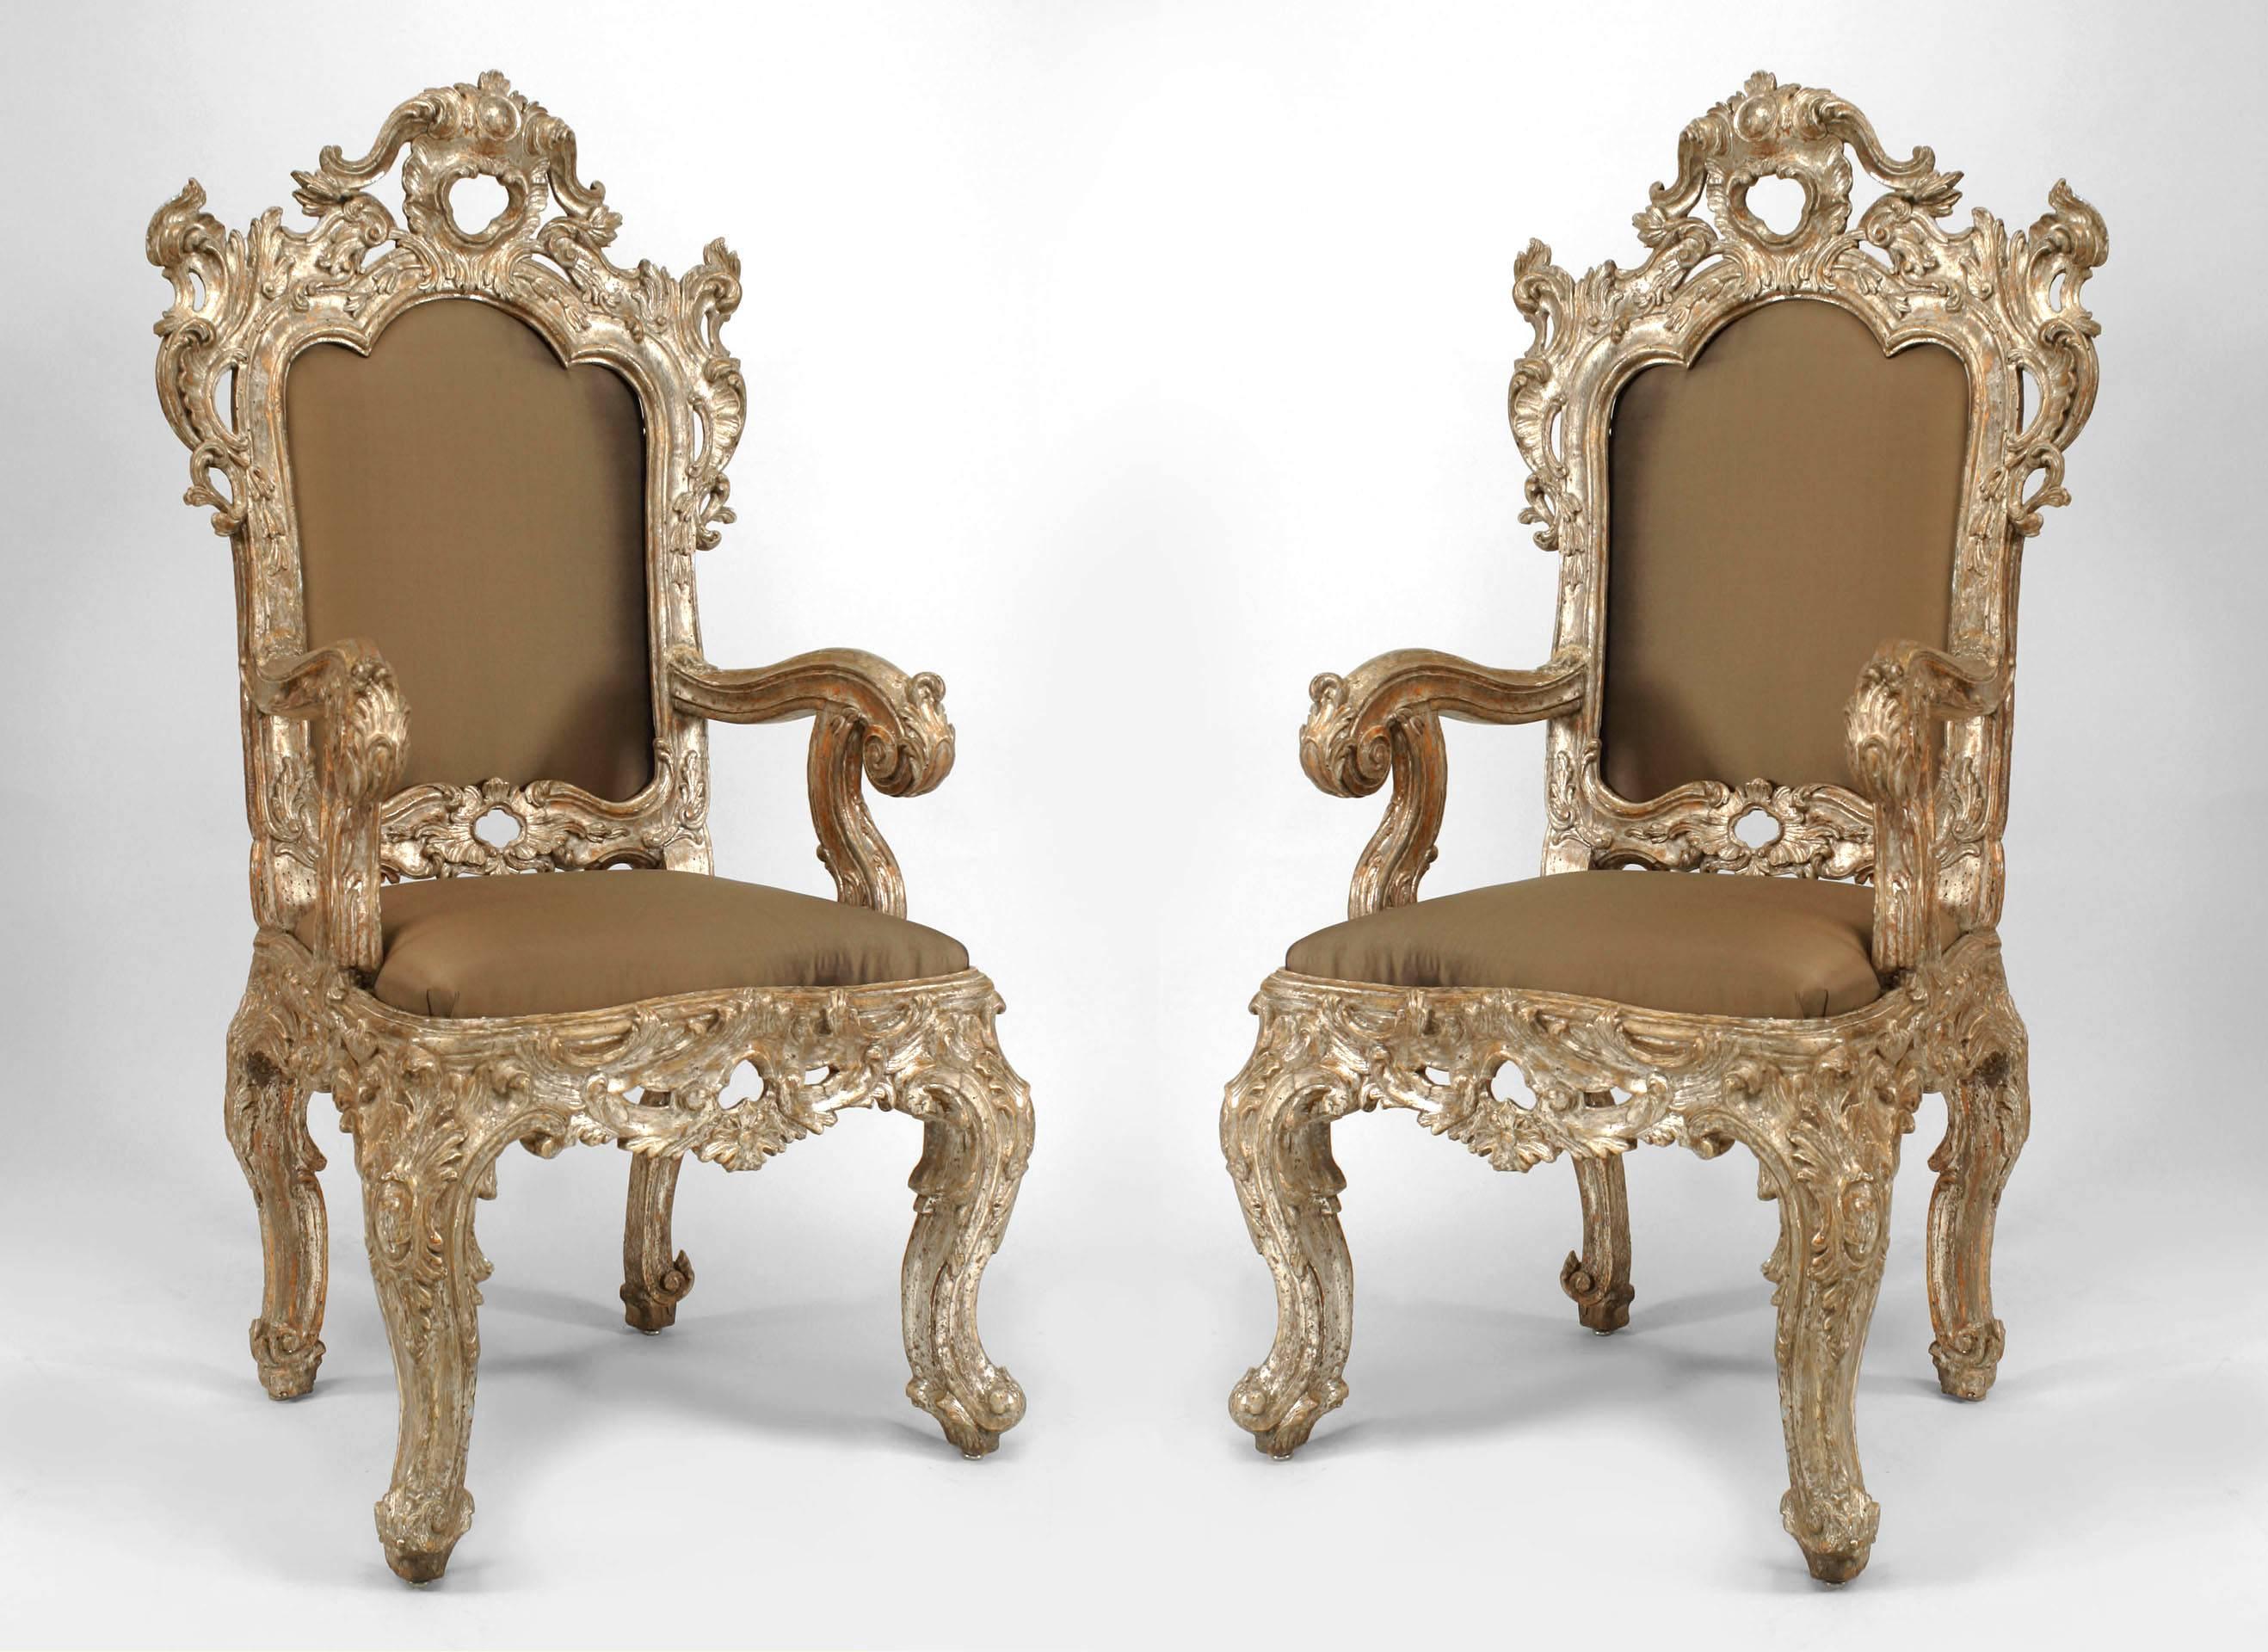 Pair of antique Italian Rococo high back silver-gilt carved throne style Armchairs with beige upholstered seat and back panels (1 similar-Inv. #037738A)
